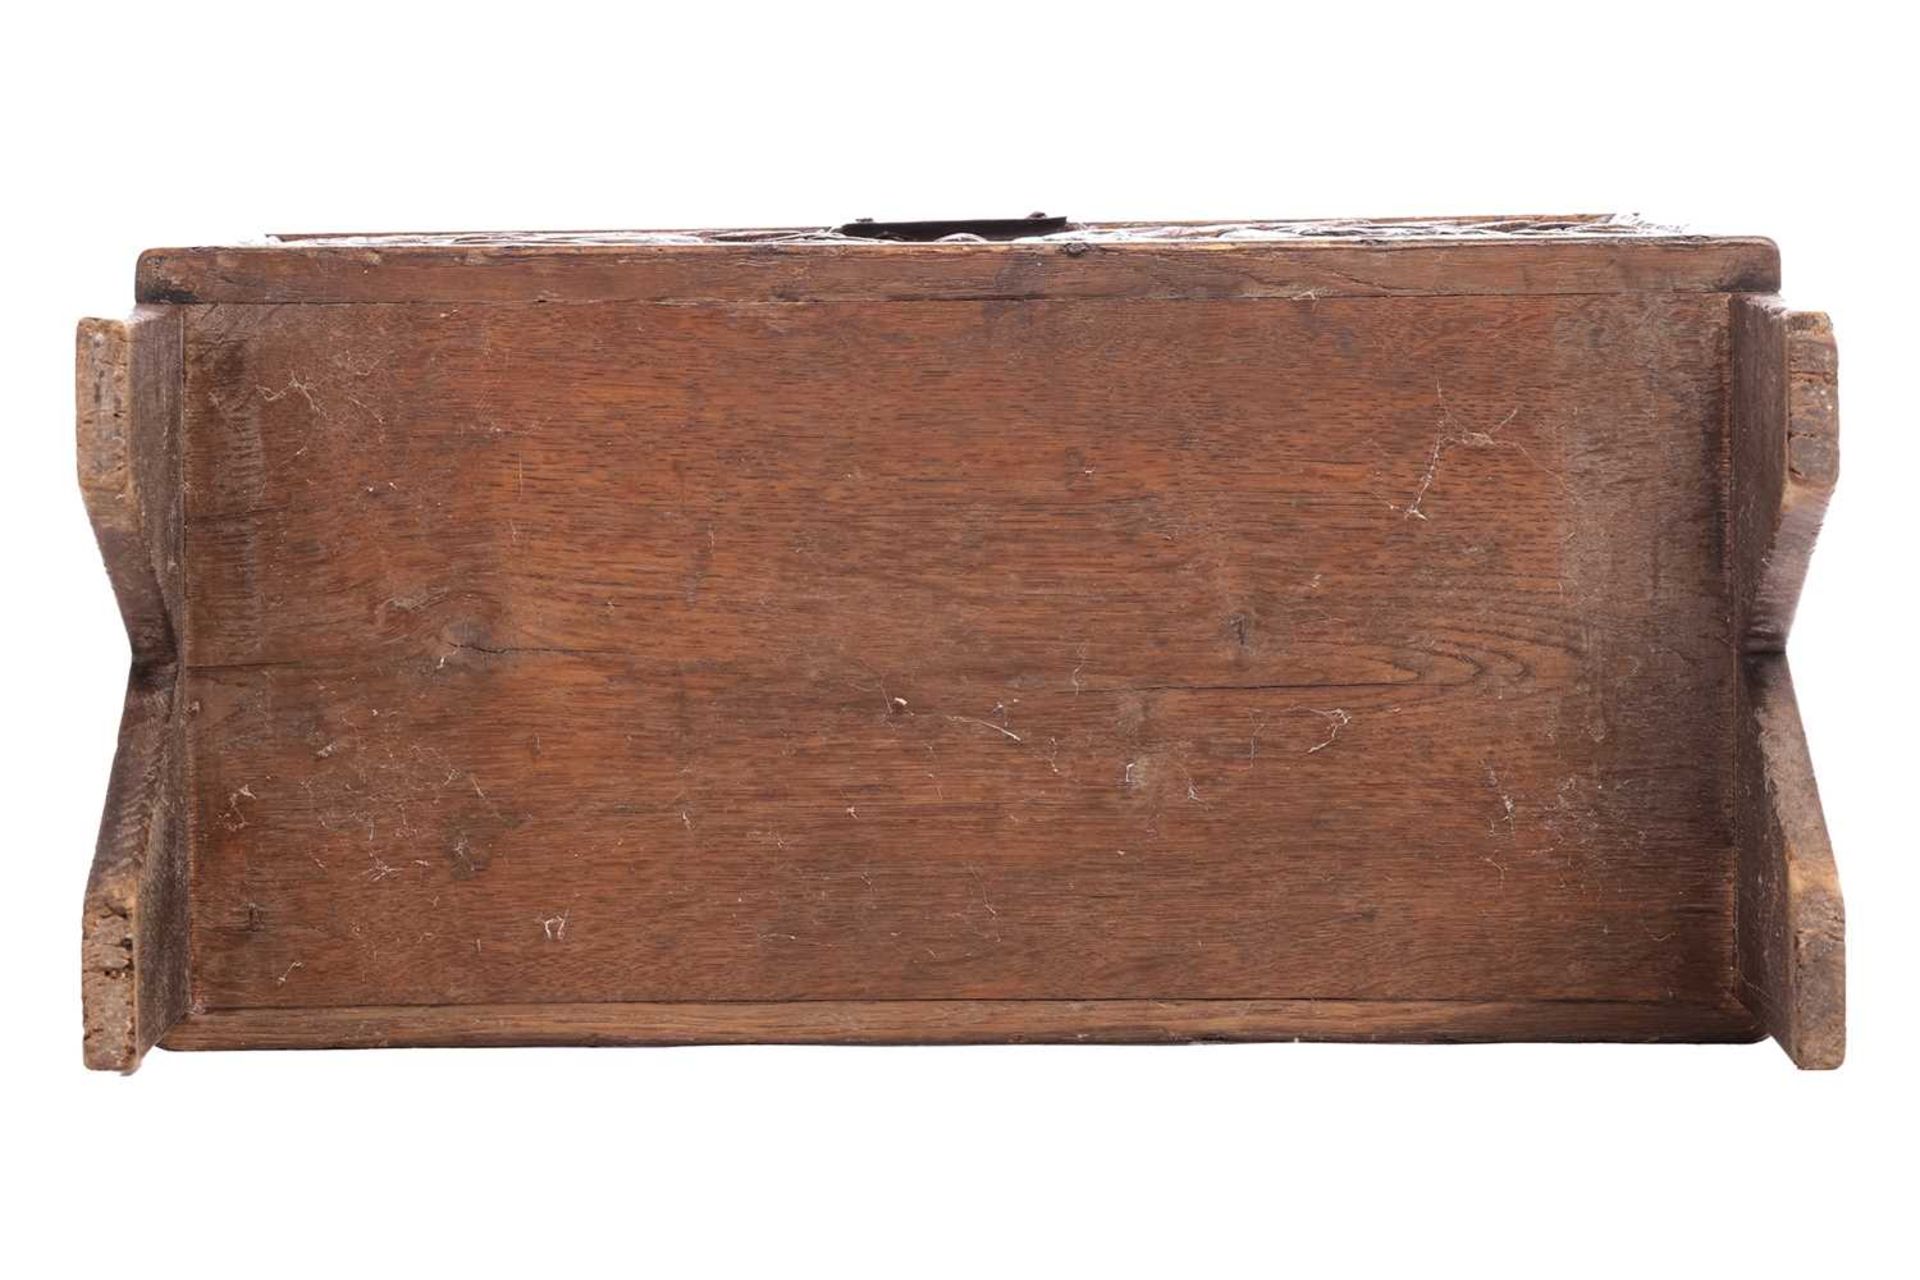 A small 17th-century style oak six-plank coffer, the frieze carved with Romanesque portrait roundels - Image 6 of 6